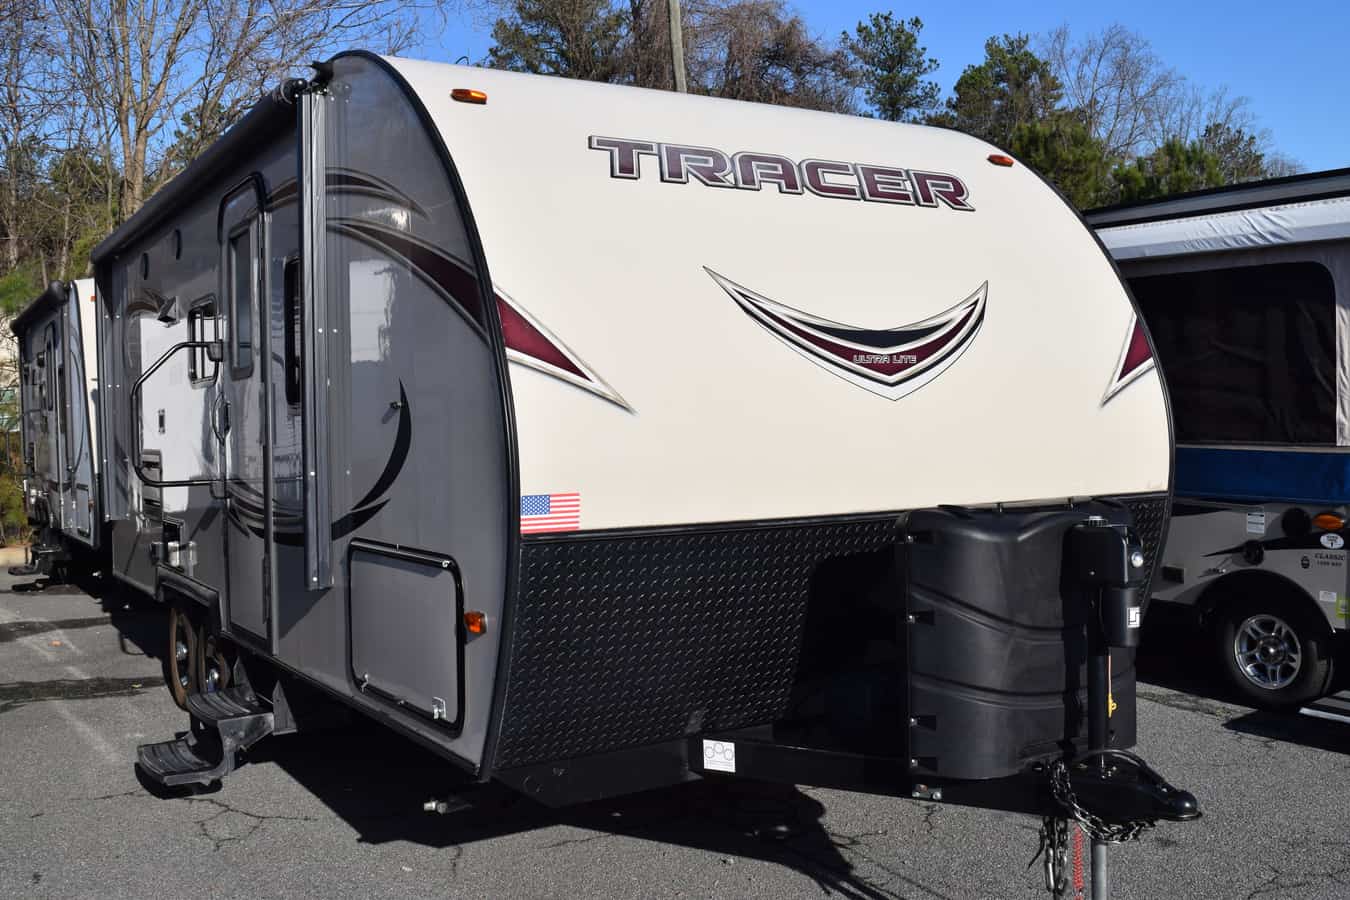 USED 2016 Prime Time TRACER 215 AIR